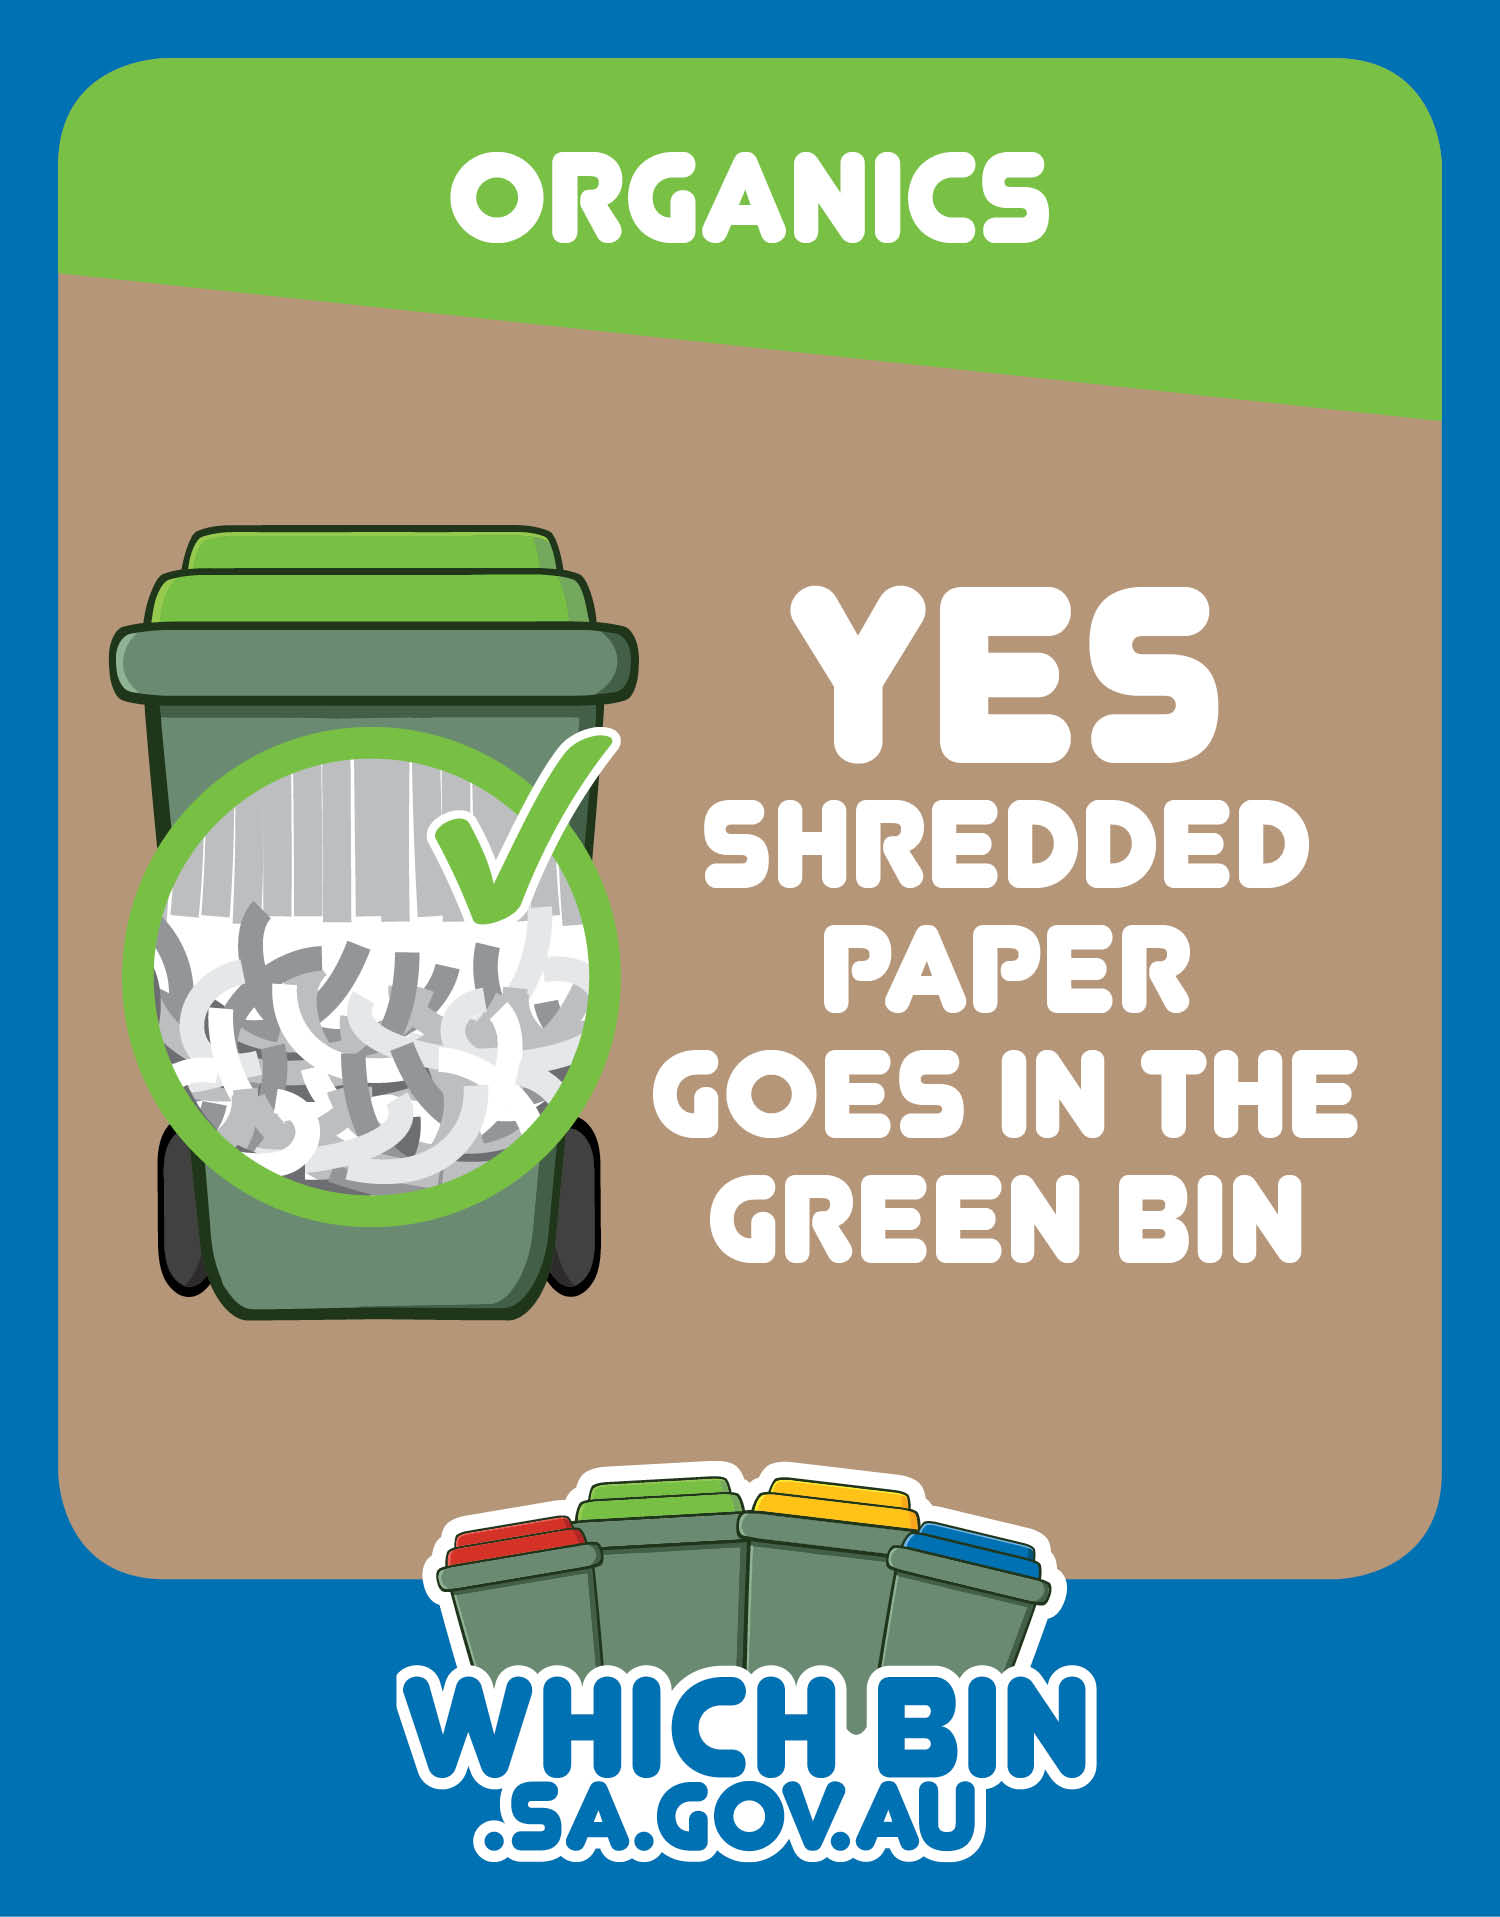 Shredded paper is good to go in the green bin